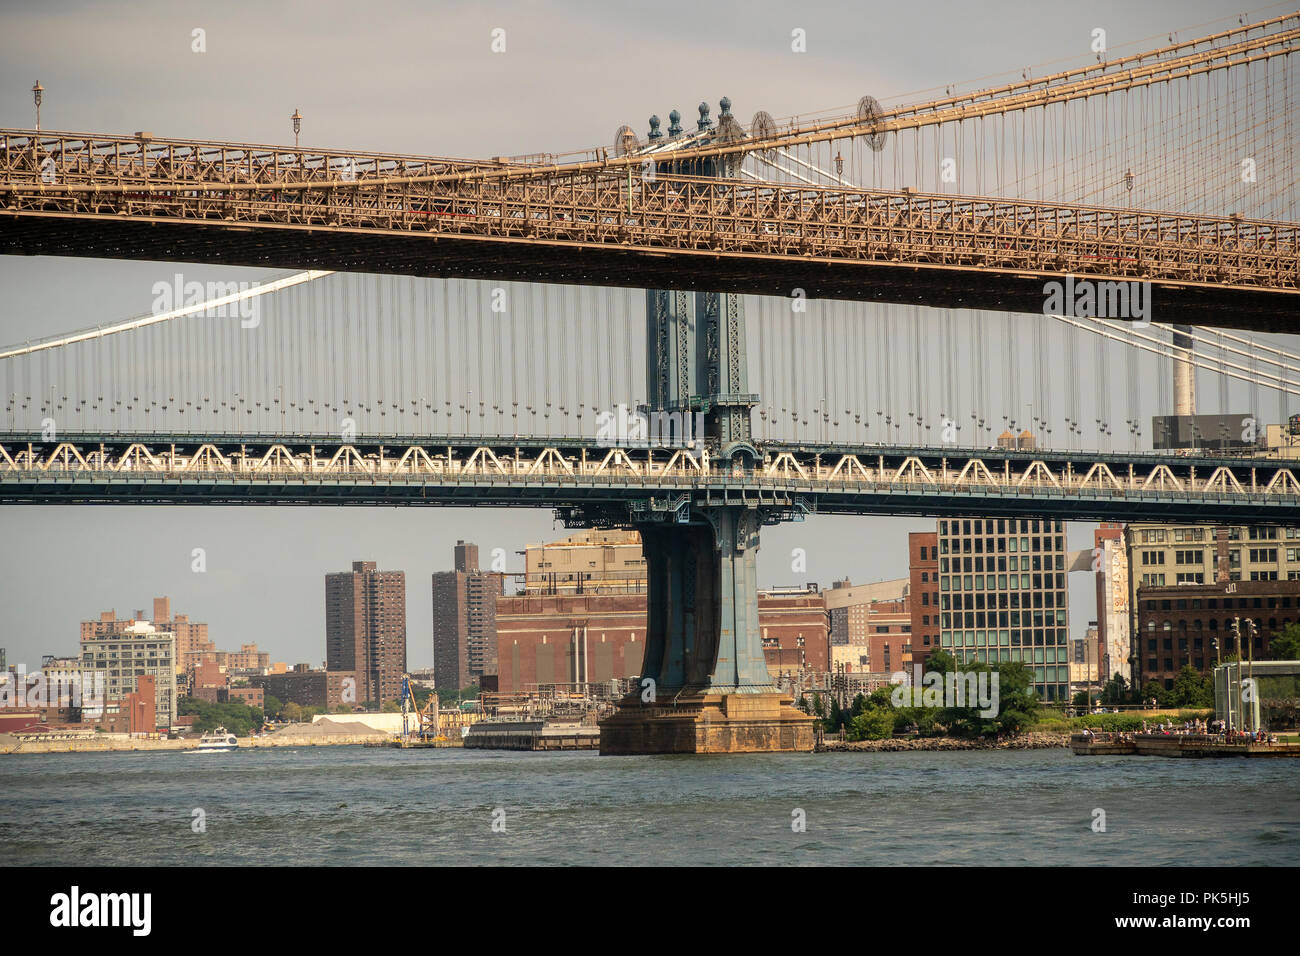 The Manhattan Bridge And The Brooklyn Bridge In The Foreground Crossing The East River In New York On Sunday September 2 18 C Richard B Levine Stock Photo Alamy